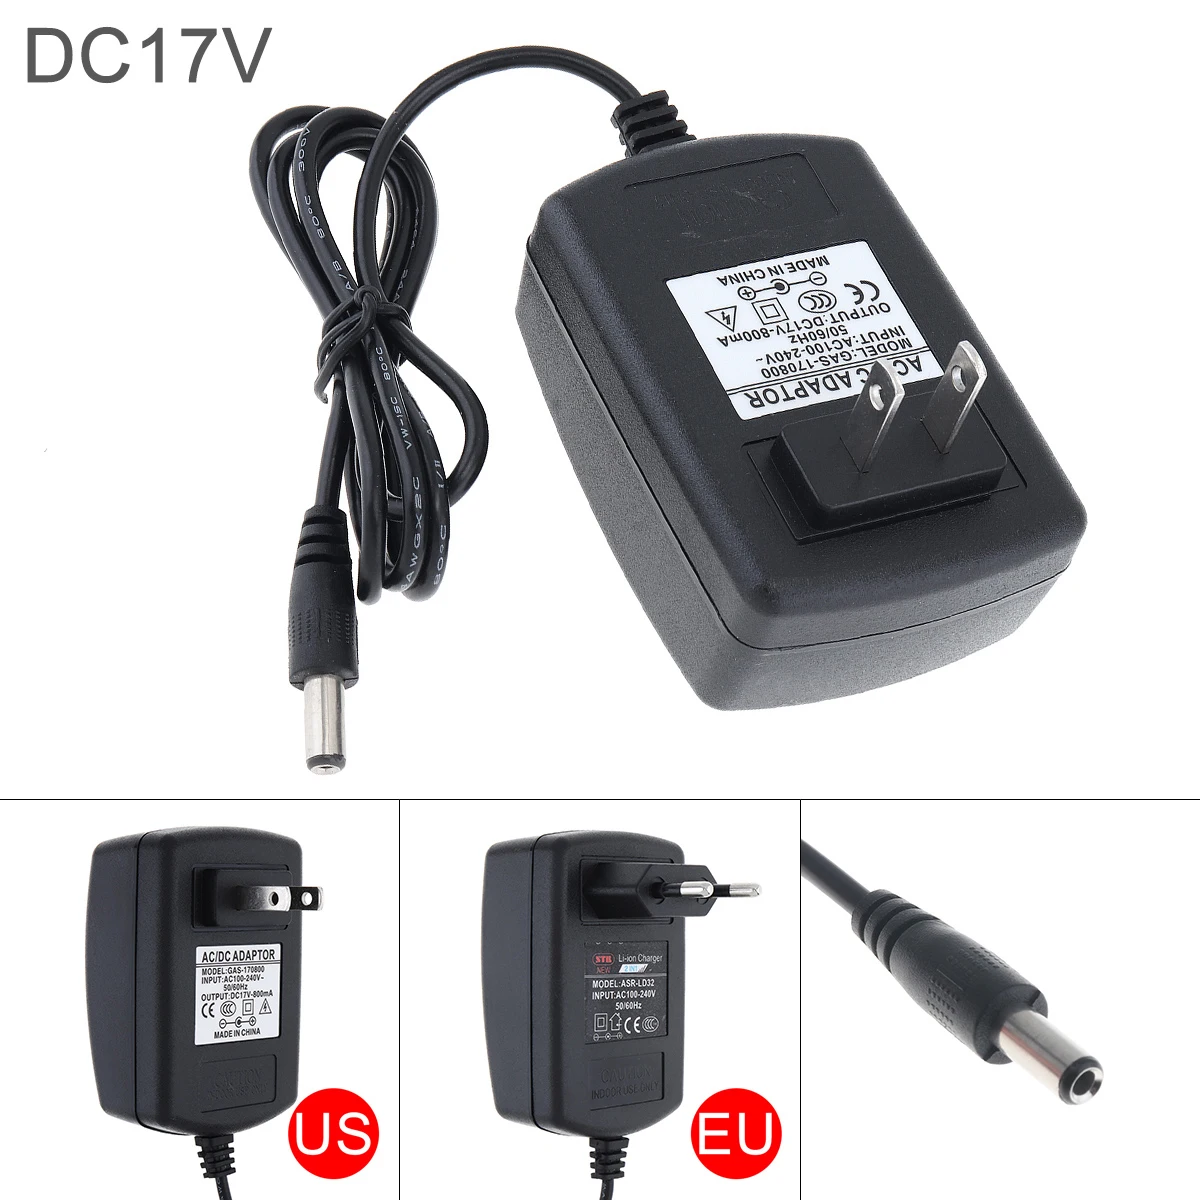 80cm Universal DC 16.8-17V Lithium Battery Rechargeable Charger 100-240V Power Supply for Lithium Electrical Drill Screwdriver the battery charger 12 v24v high power multifunctional pure copper universal battery car battery charger